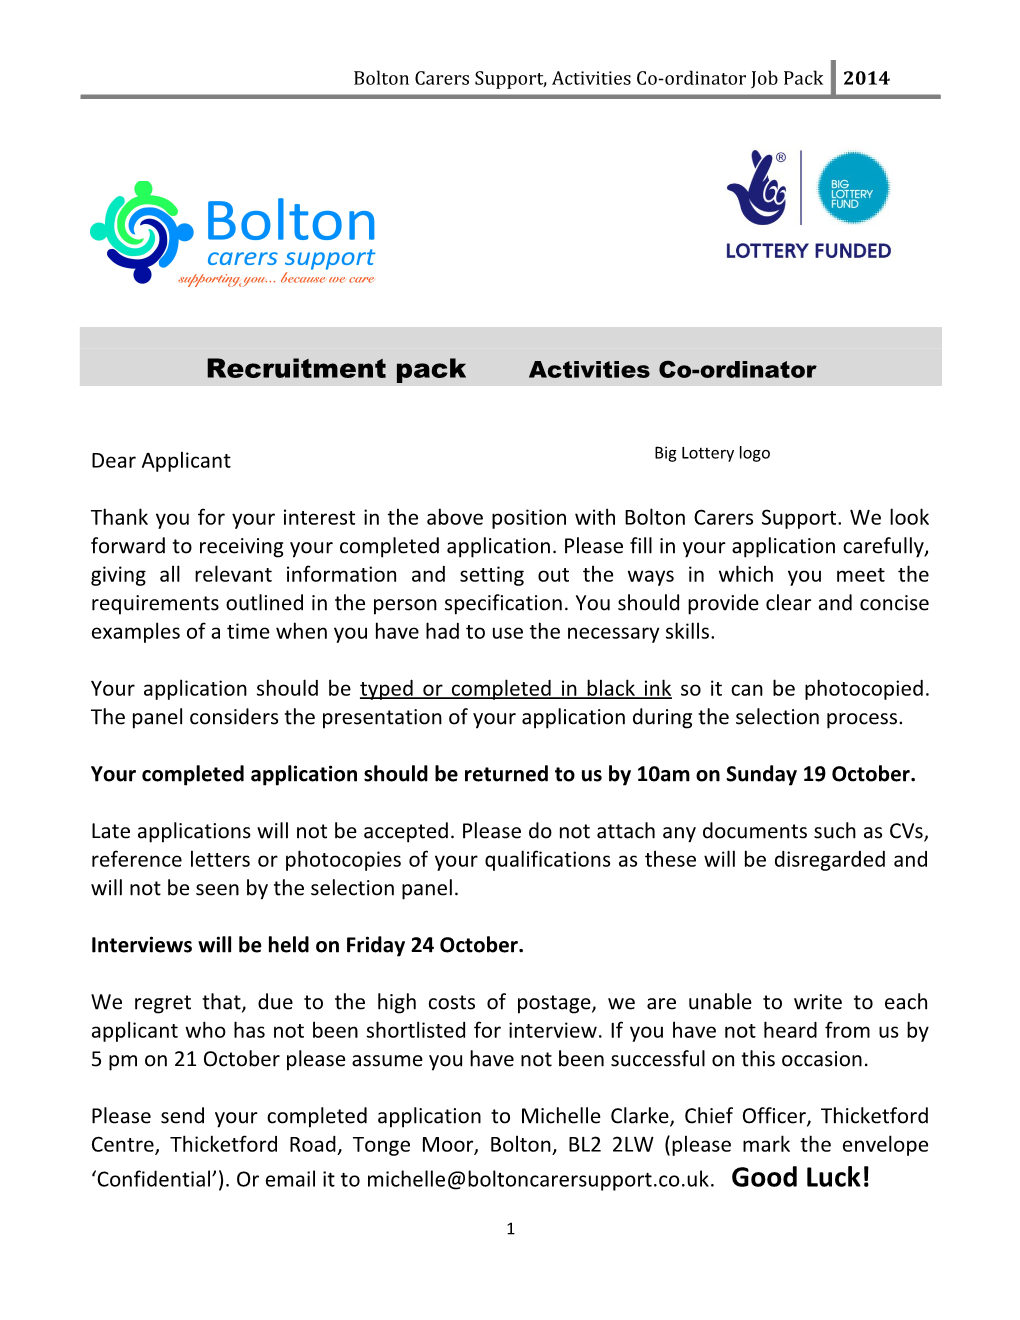 Bolton Carers Support, Activities Co-Ordinator Job Pack